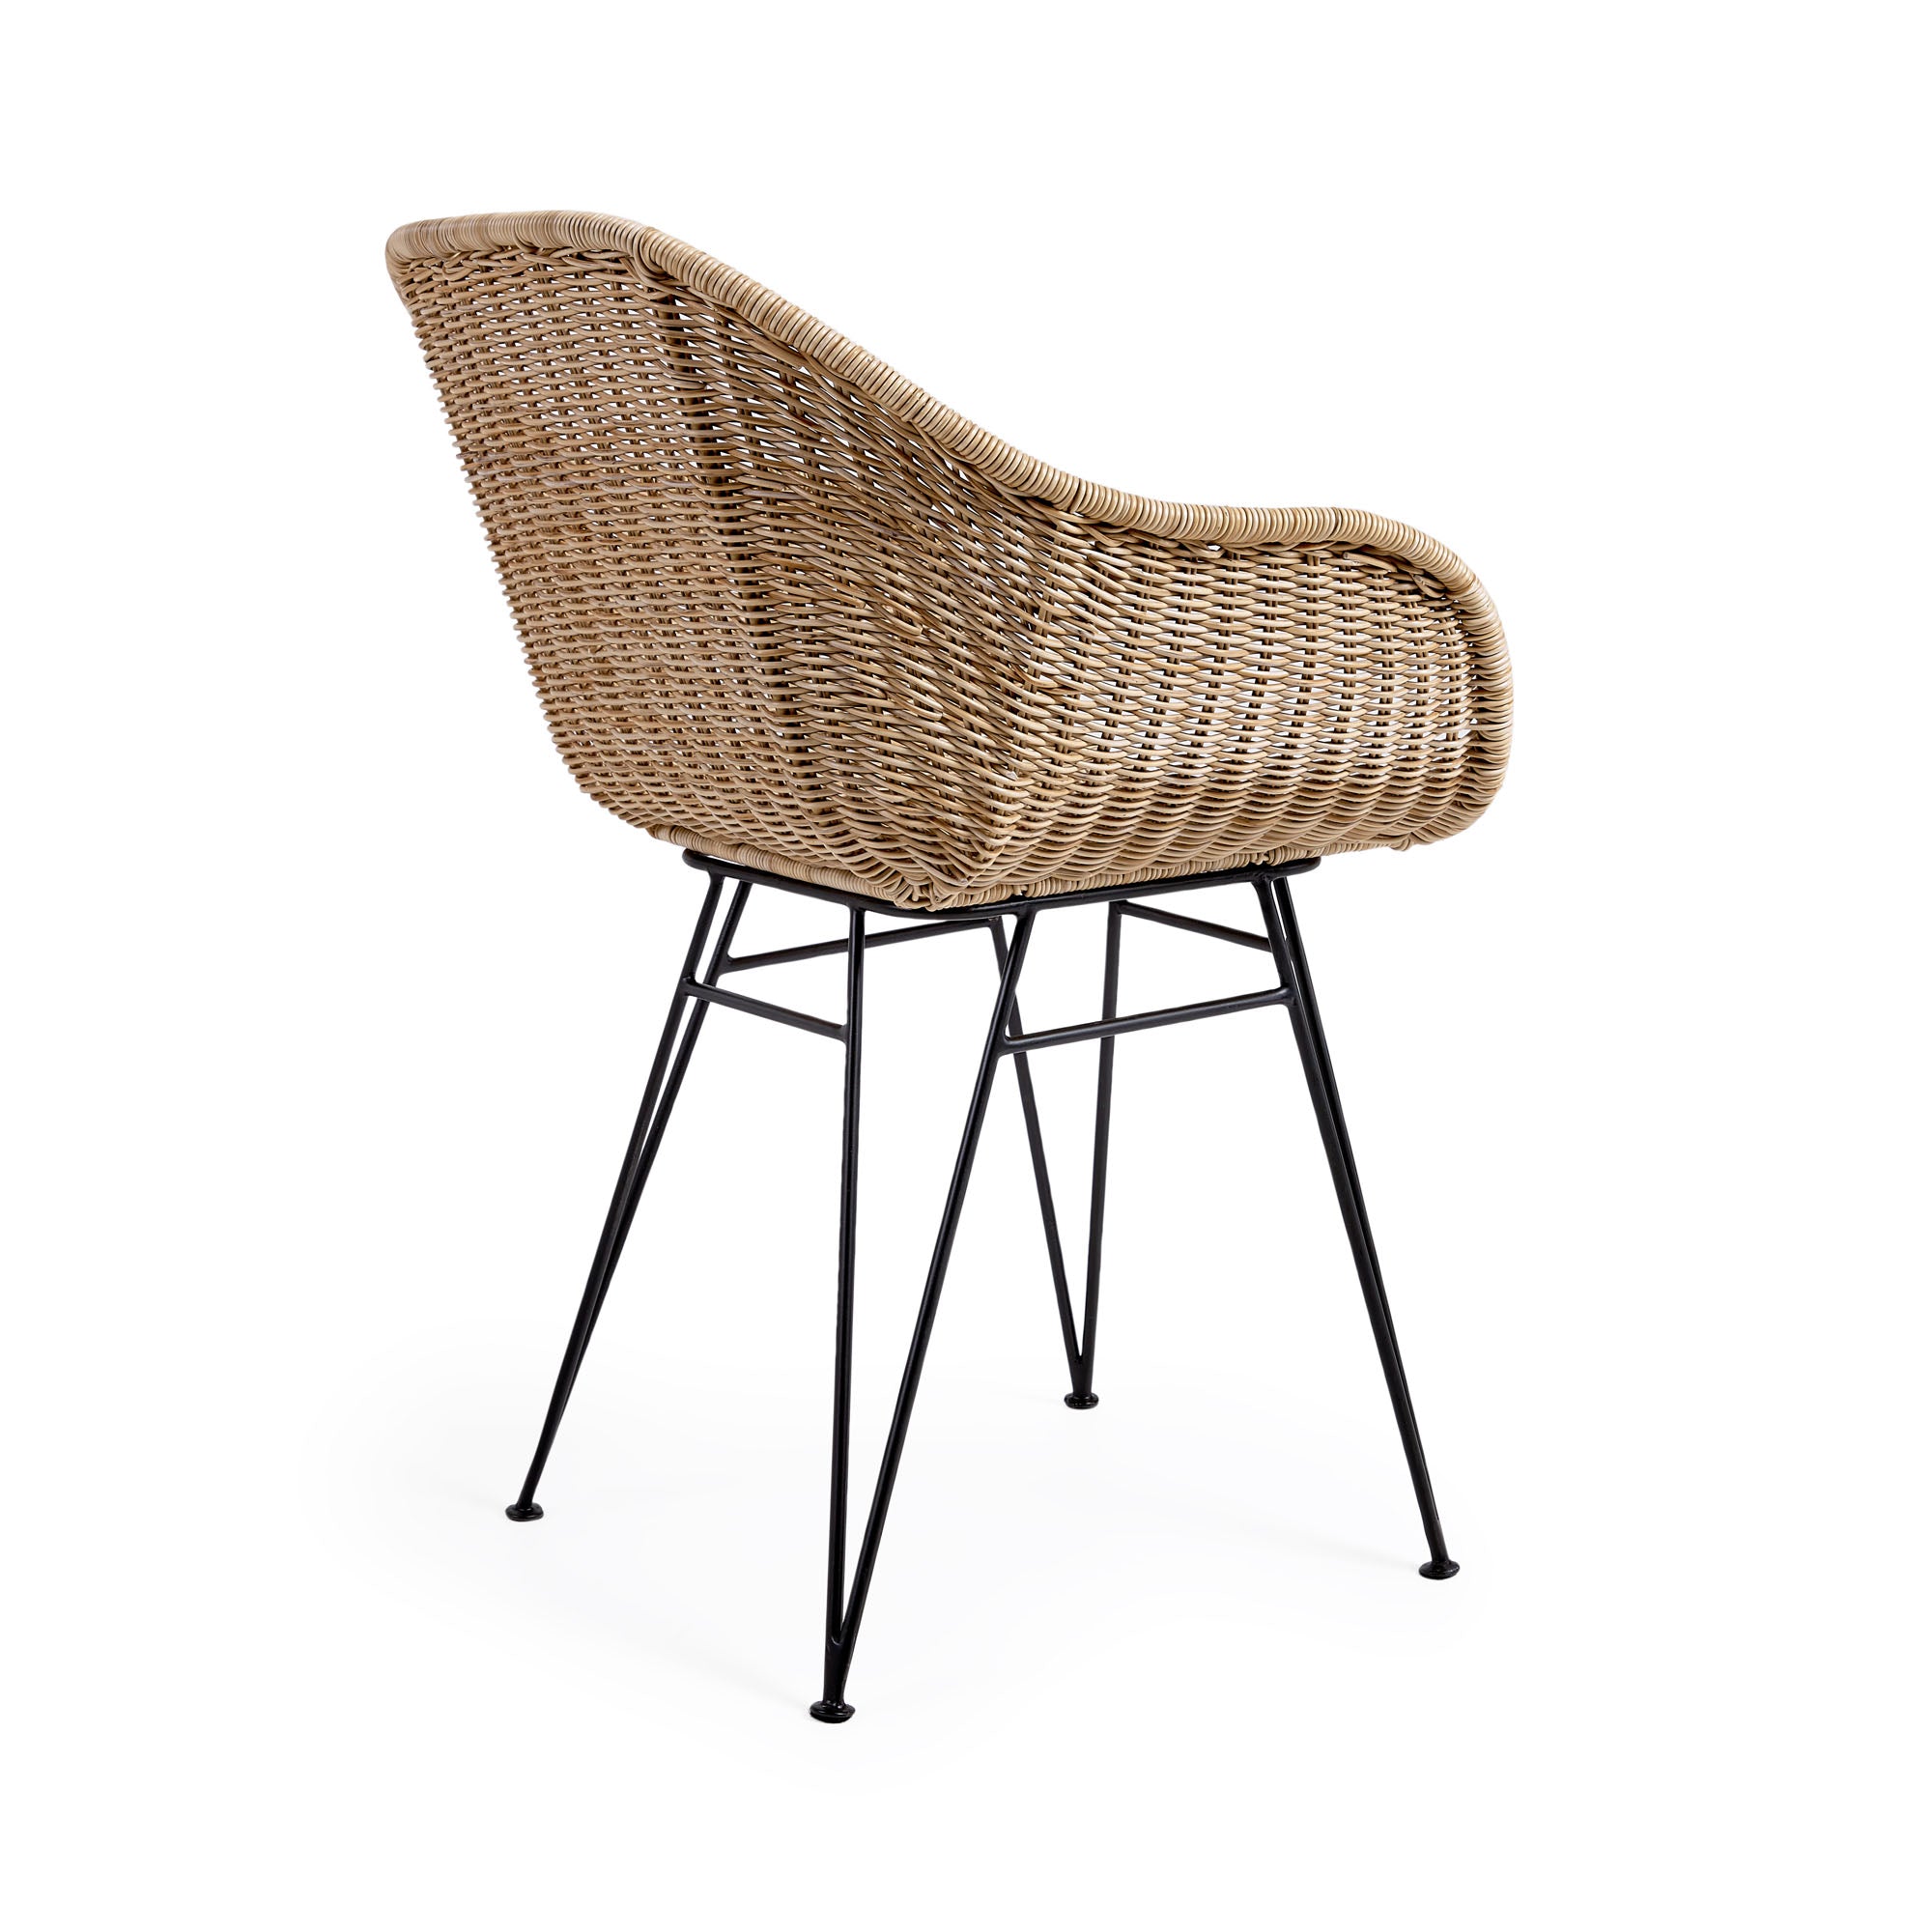 Chart outdoor chair in synthetic rattan, with galvanised steel legs in a black finish